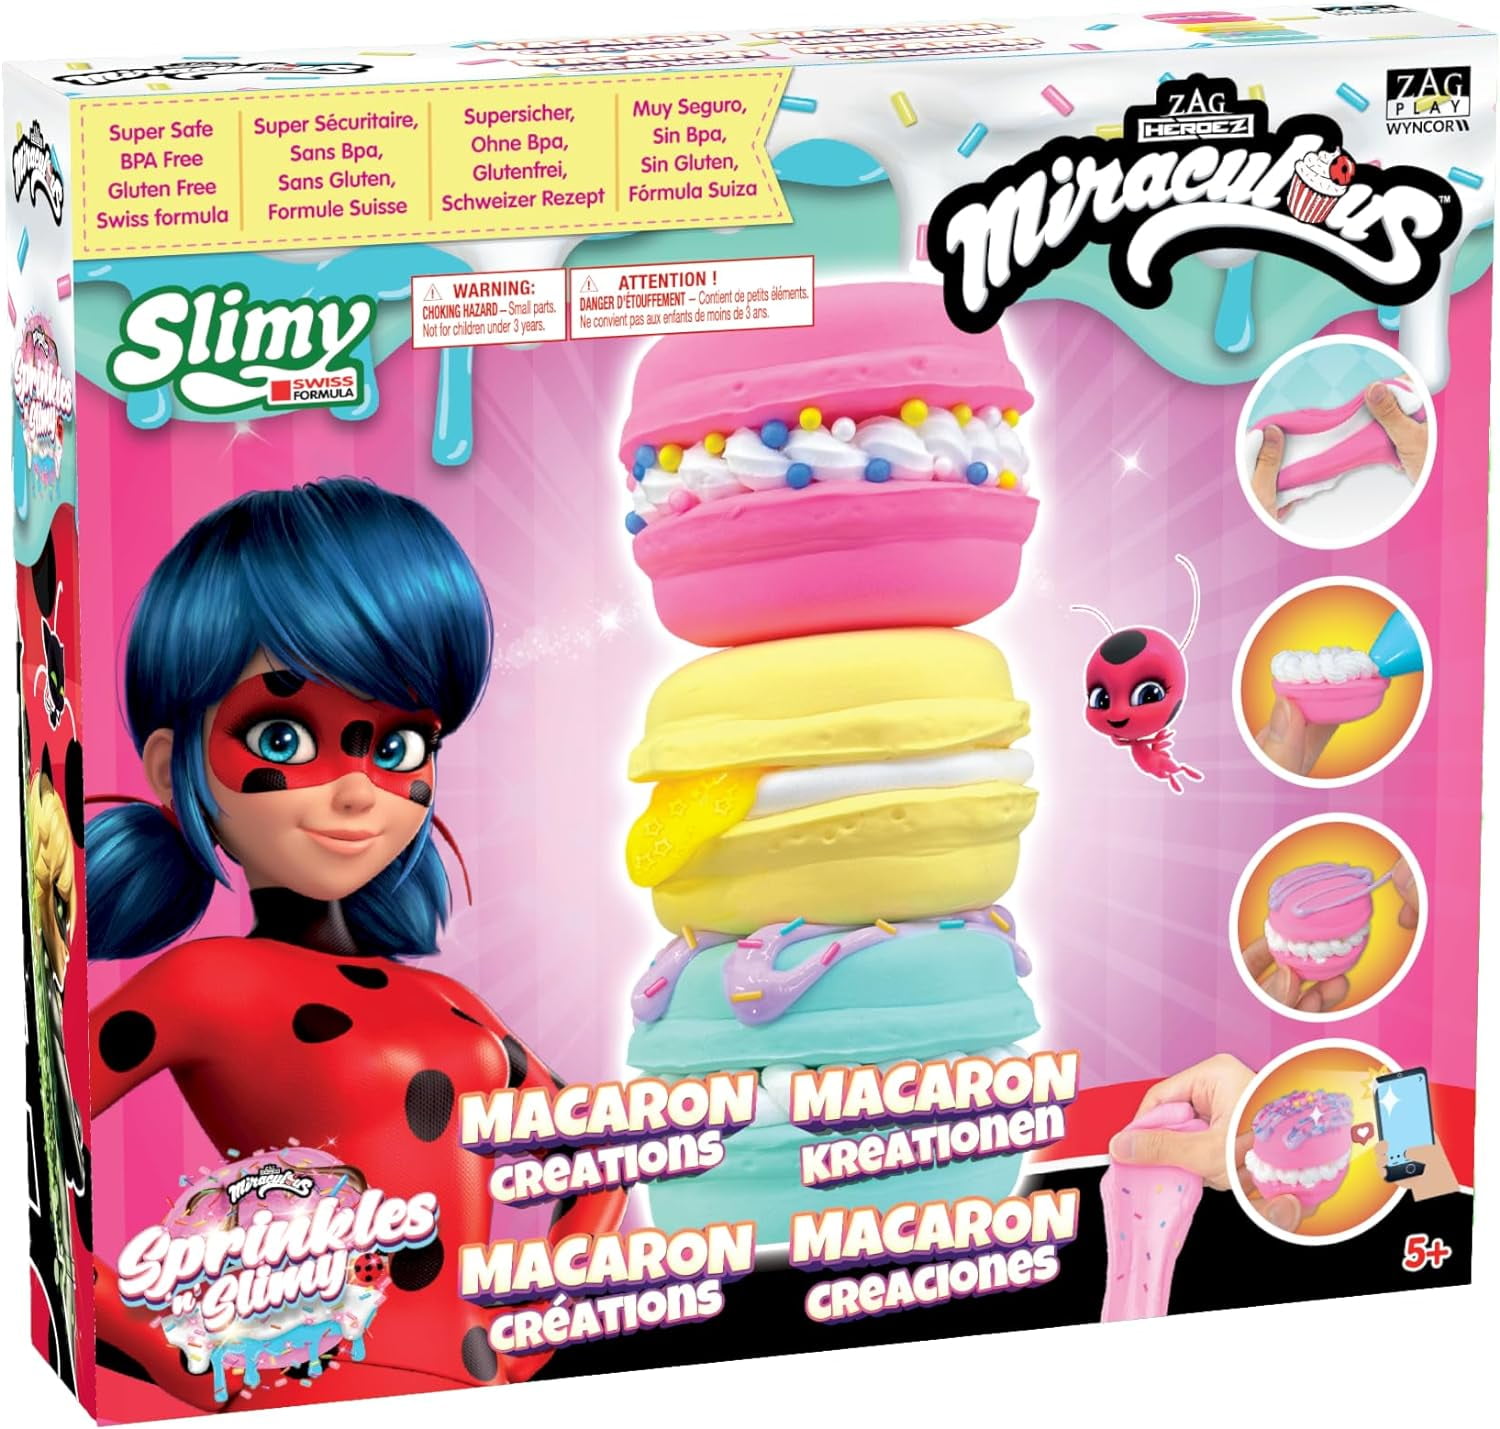 Miraculous Ladybug - Sprinkles N' Slimy Donuts - Slime Kit for Girls and Boys, Role Play Toys for Kids with Donut Maker, Slime & Light Clay, Sprinkles